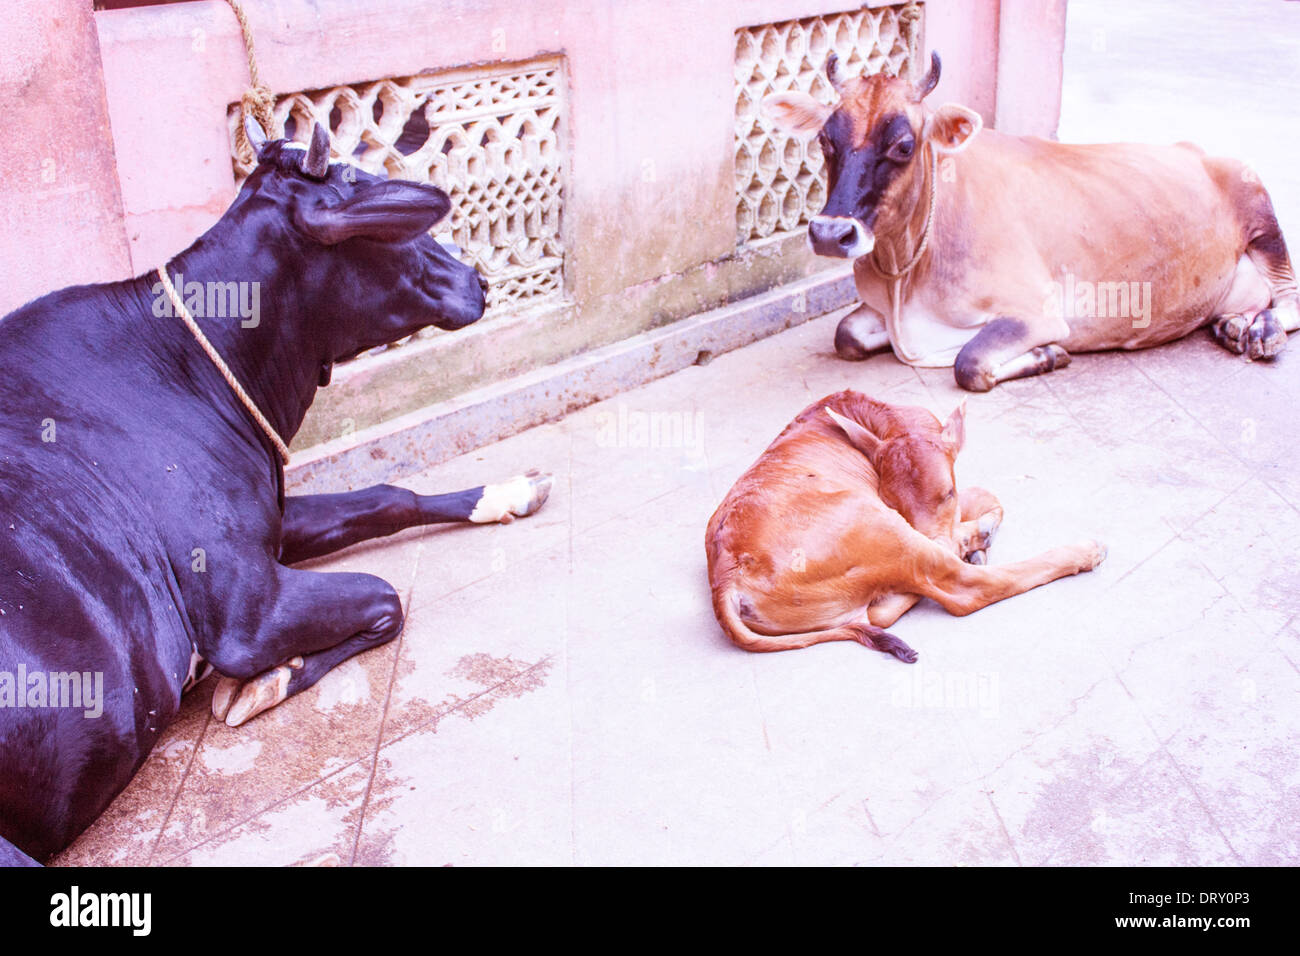 Cows on the street in India, Asia Stock Photo